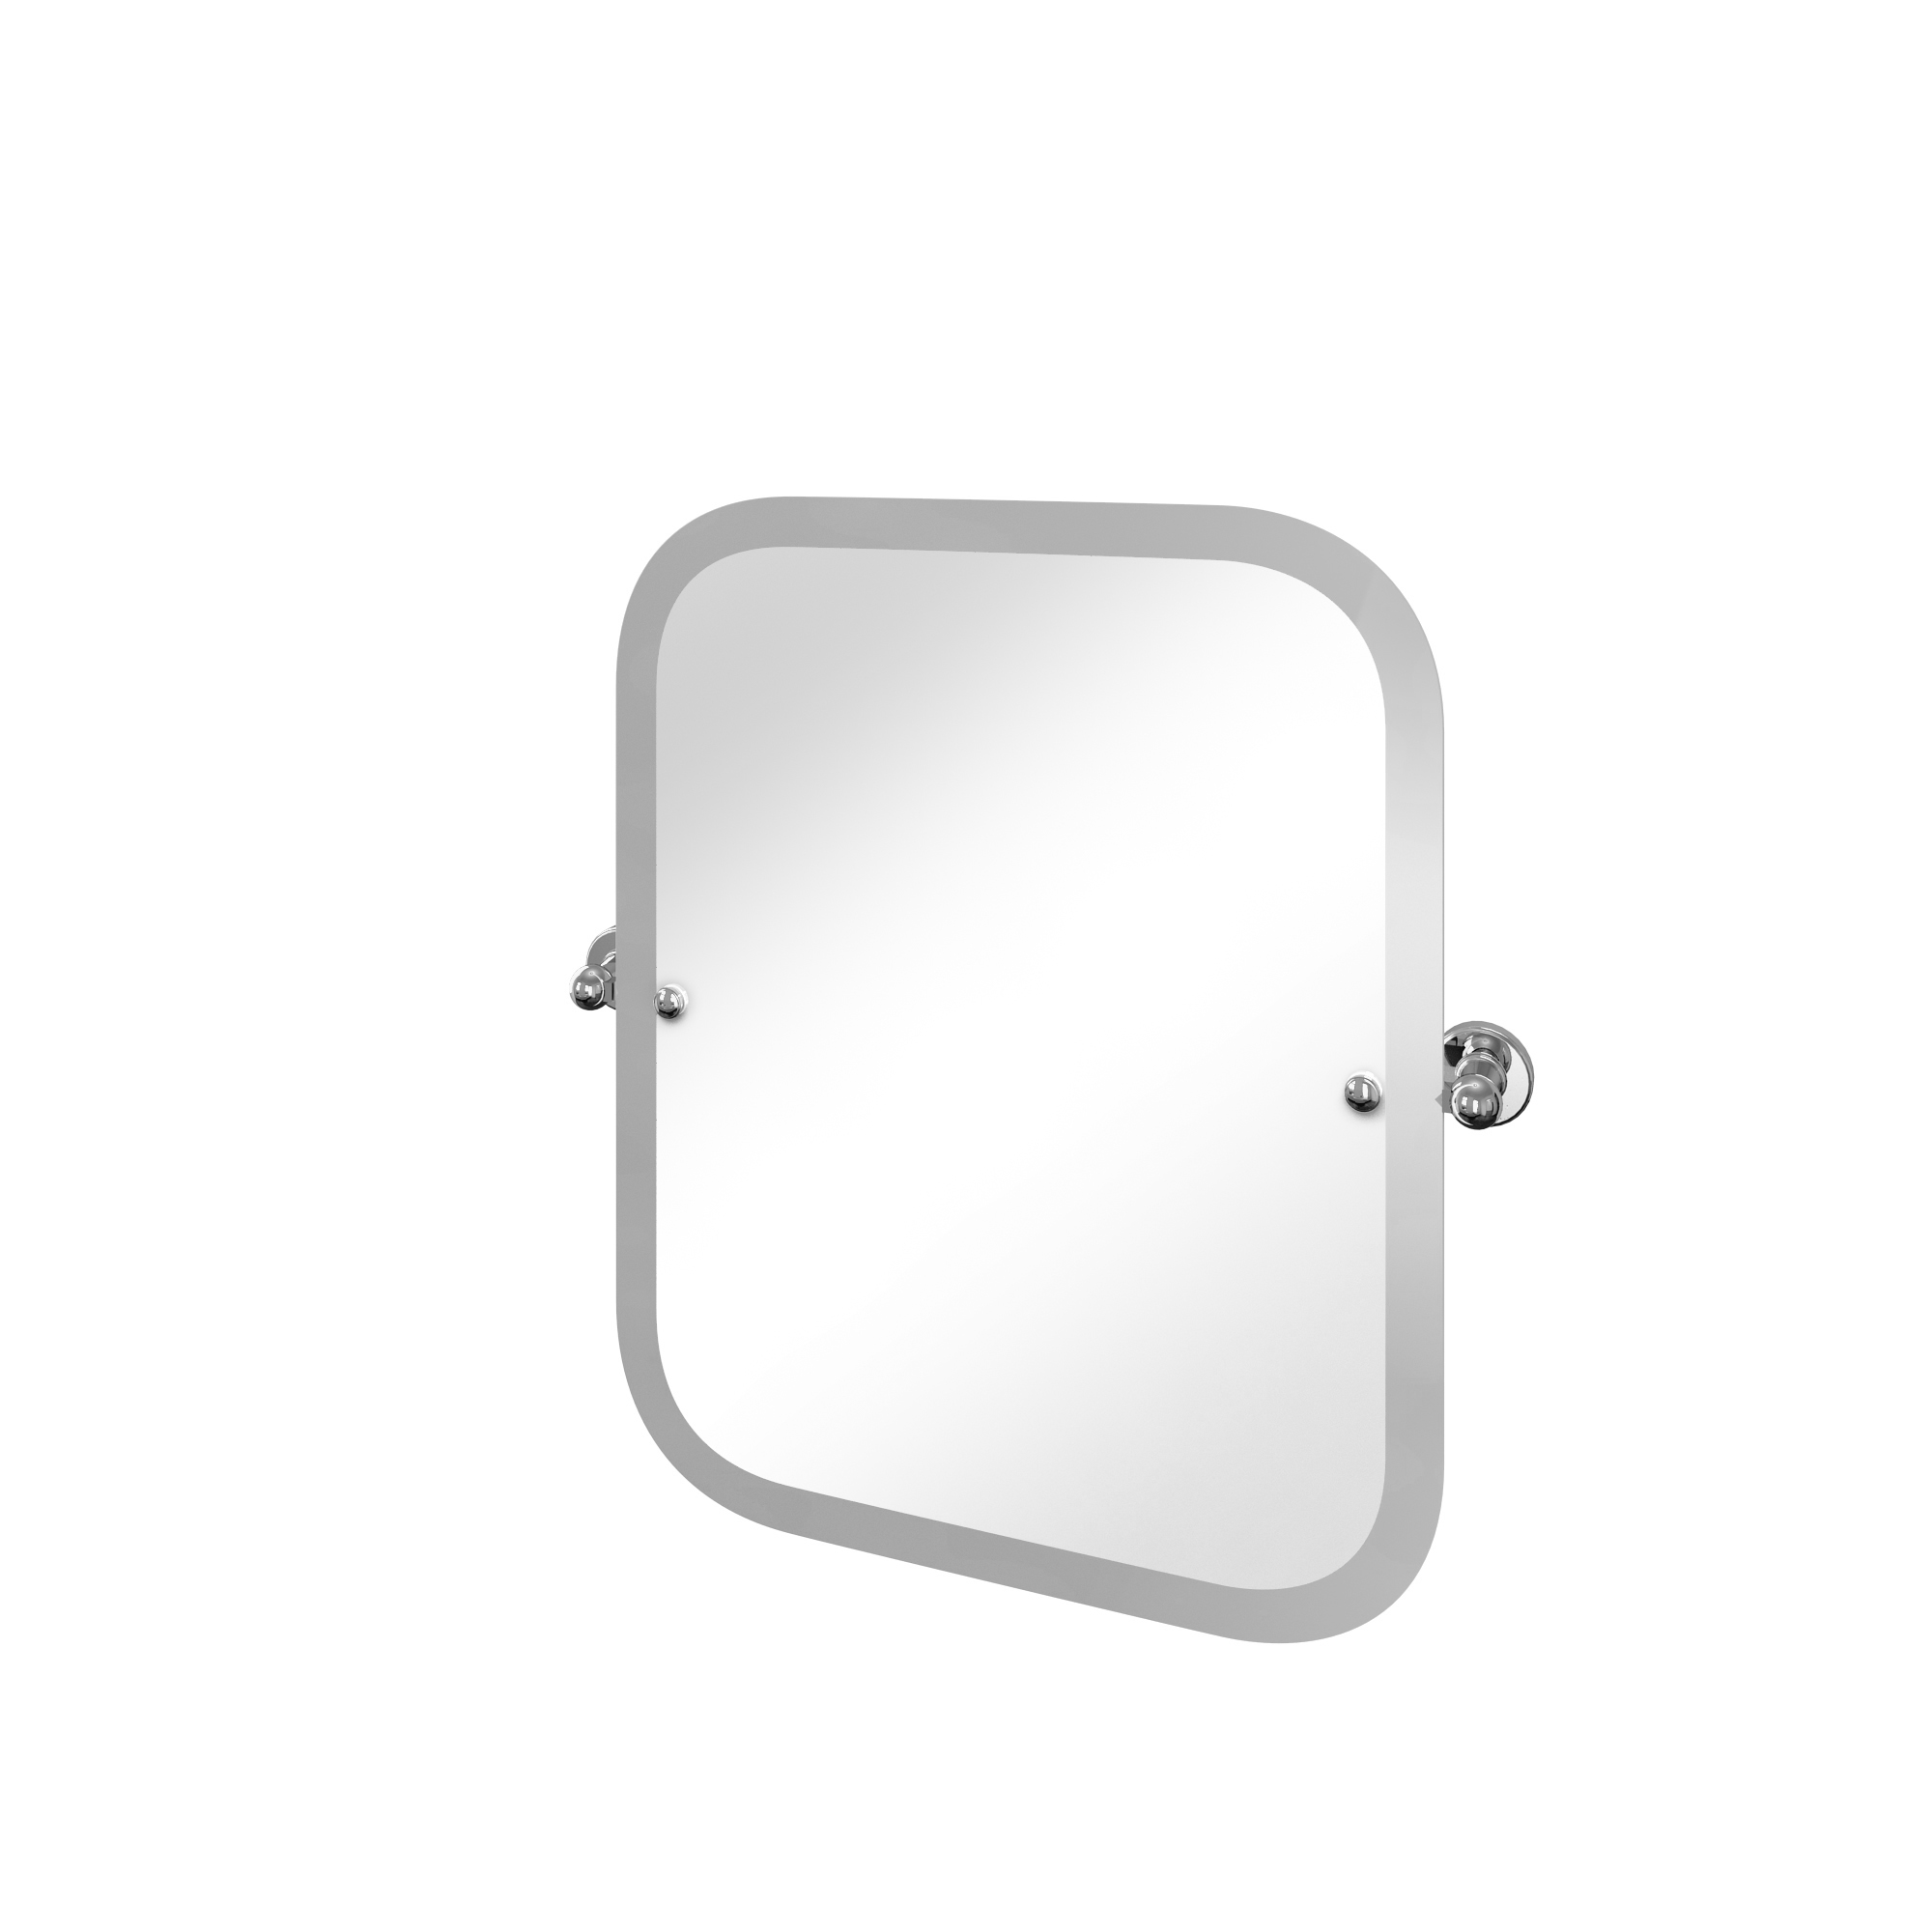 Rectangular swivel mirror with curved corners chrome plated brass wall mounts